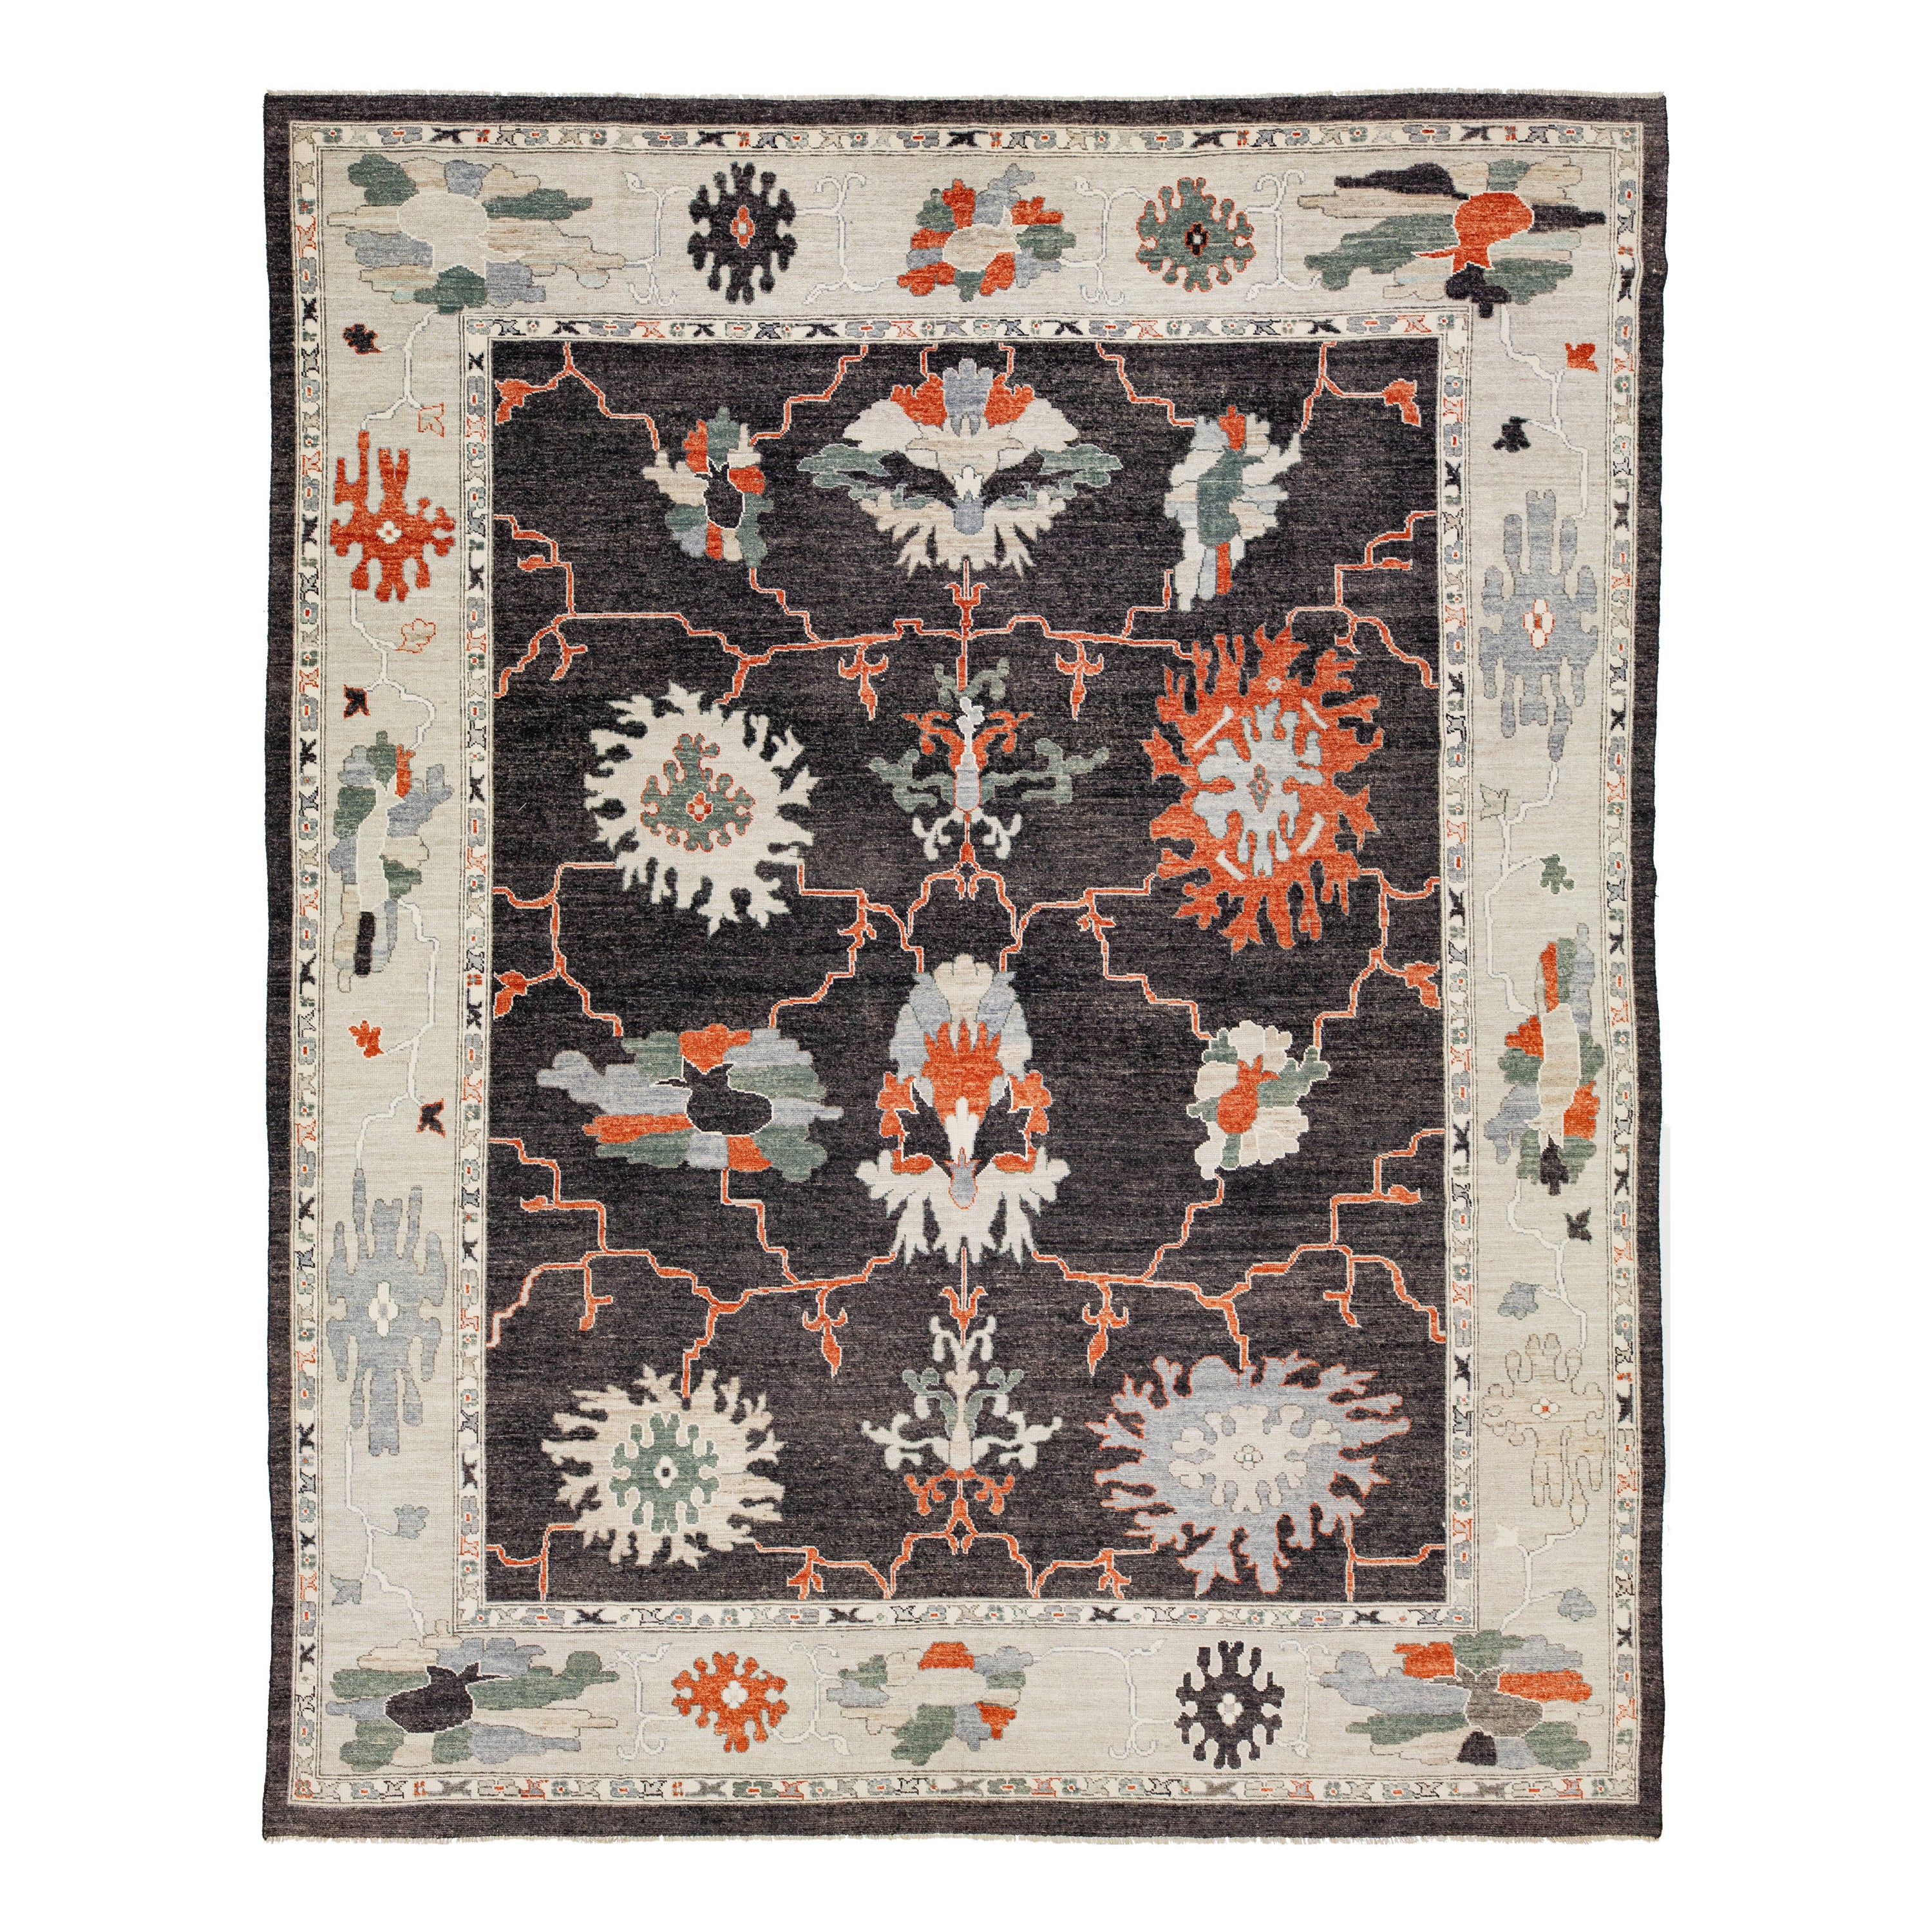 Contemporary Turkish Oushak Wool Rug In Charcoal Color With Artwork Pattern